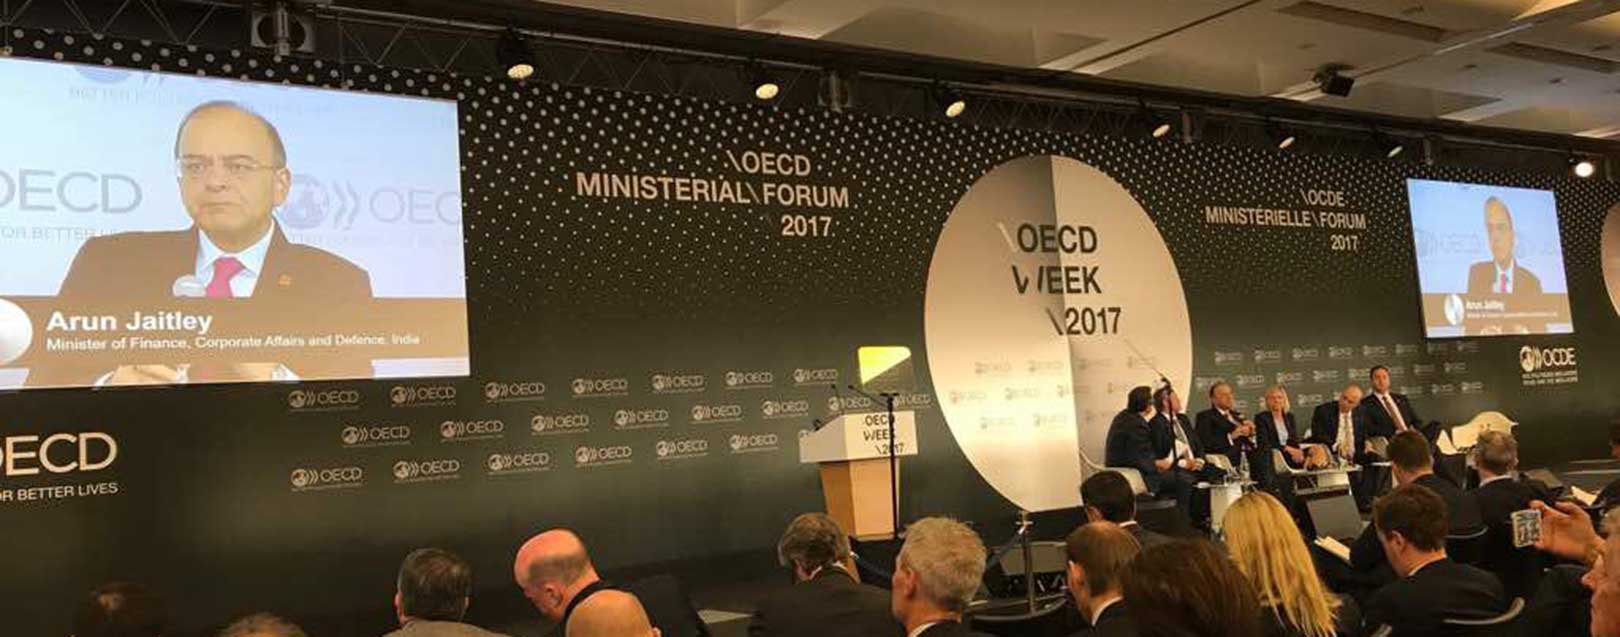 Jaitley signs OECD tax-treaty convention in Paris today